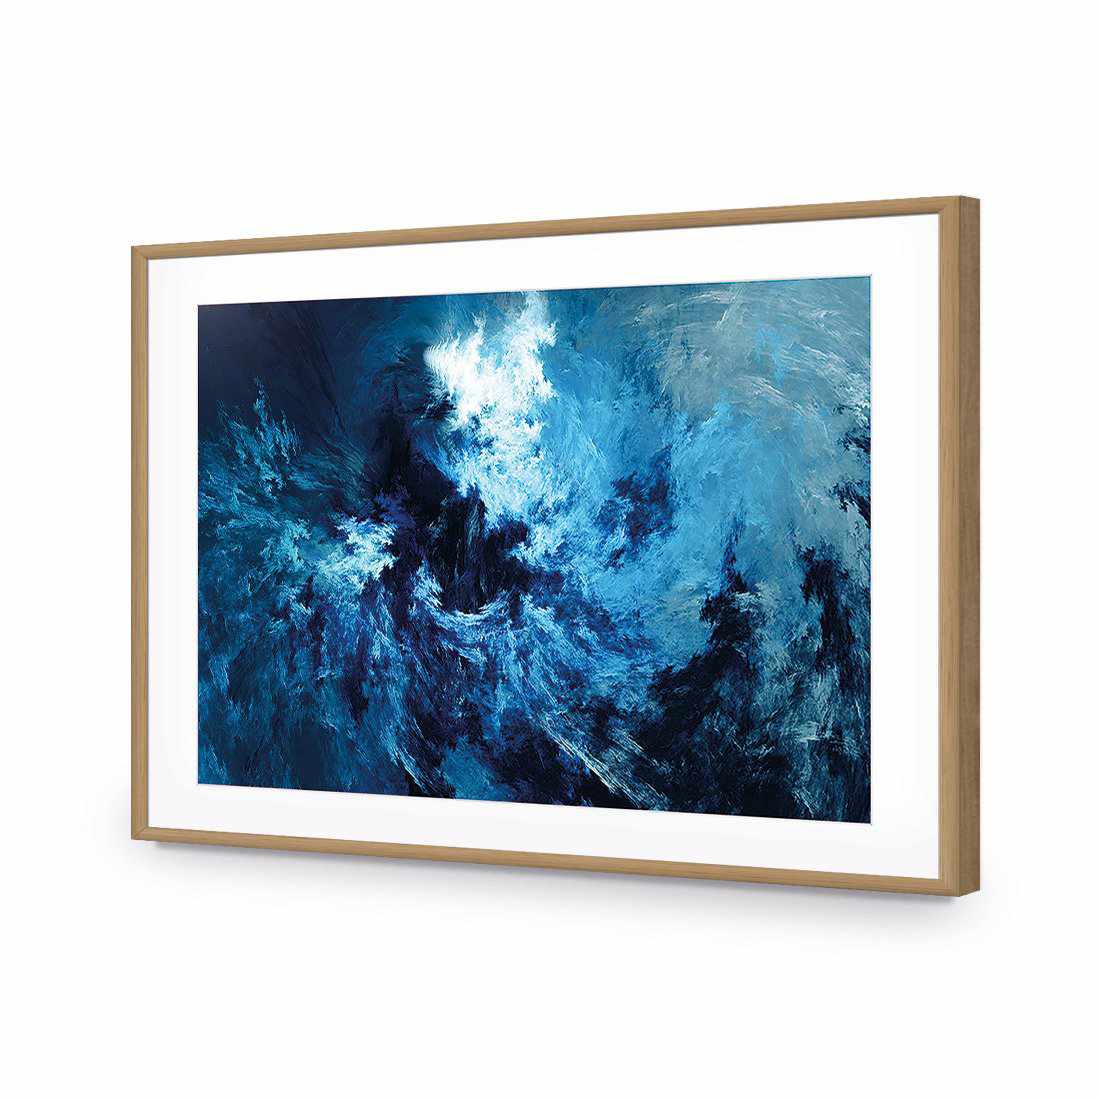 Into the Storm-Acrylic-Wall Art Design-With Border-Acrylic - Oak Frame-45x30cm-Wall Art Designs